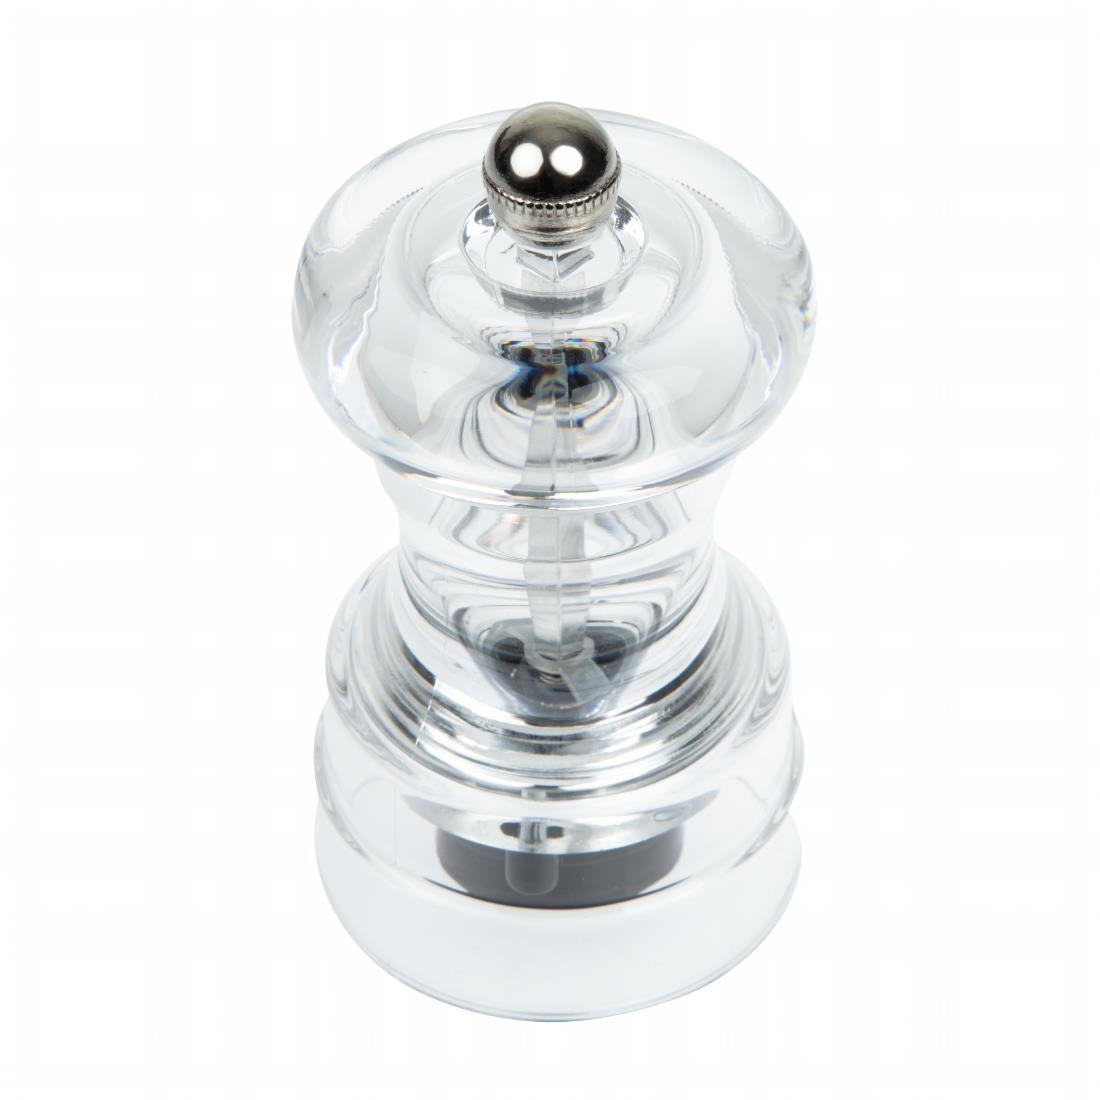 Acrylic Salt and Pepper Mill 102mm JD Catering Equipment Solutions Ltd